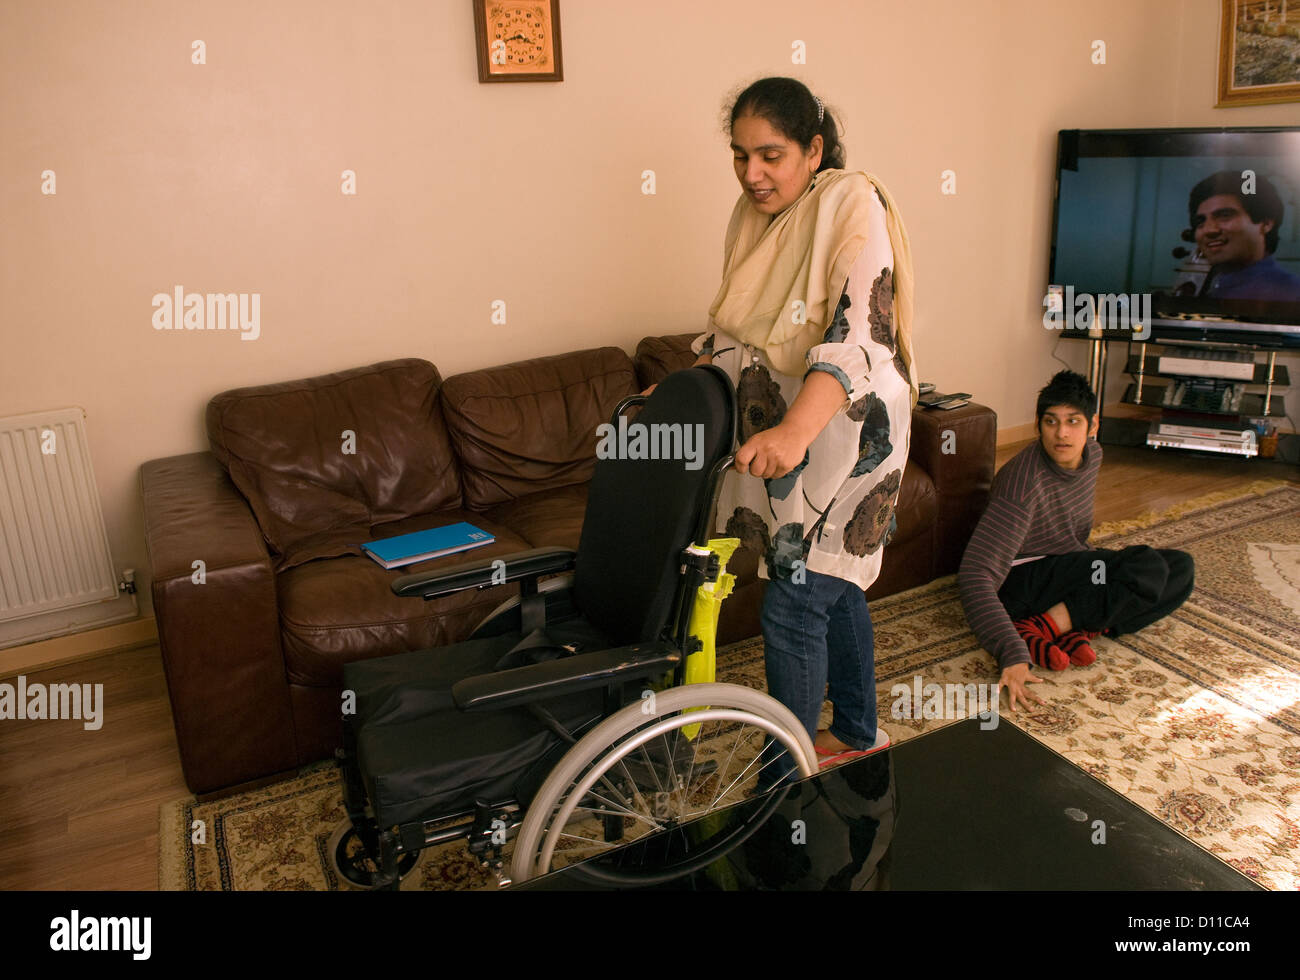 Mother who cares for her 24 year old daughter (seated on floor) with Cerebral palsy moving her wheelchair Stock Photo